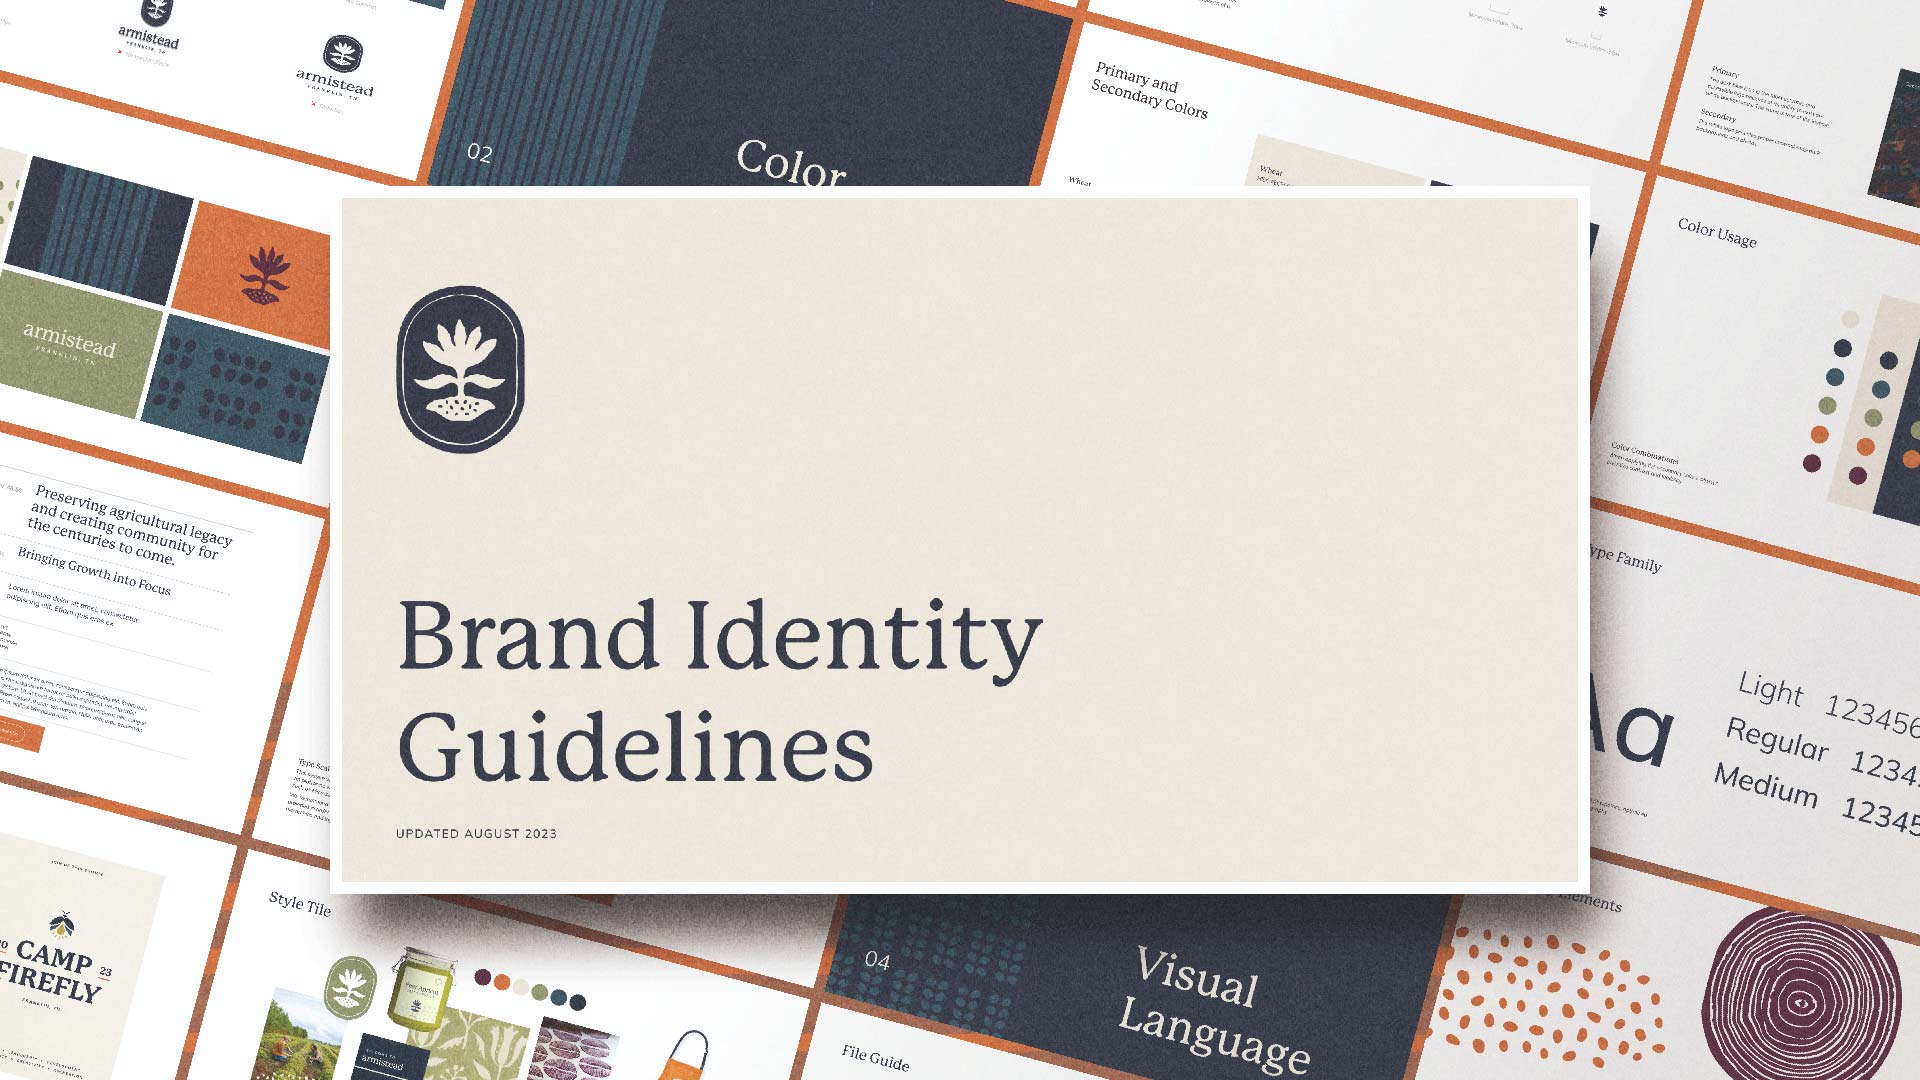 Brand Identity Guidelines cover page on top of a collage of all guideline pages